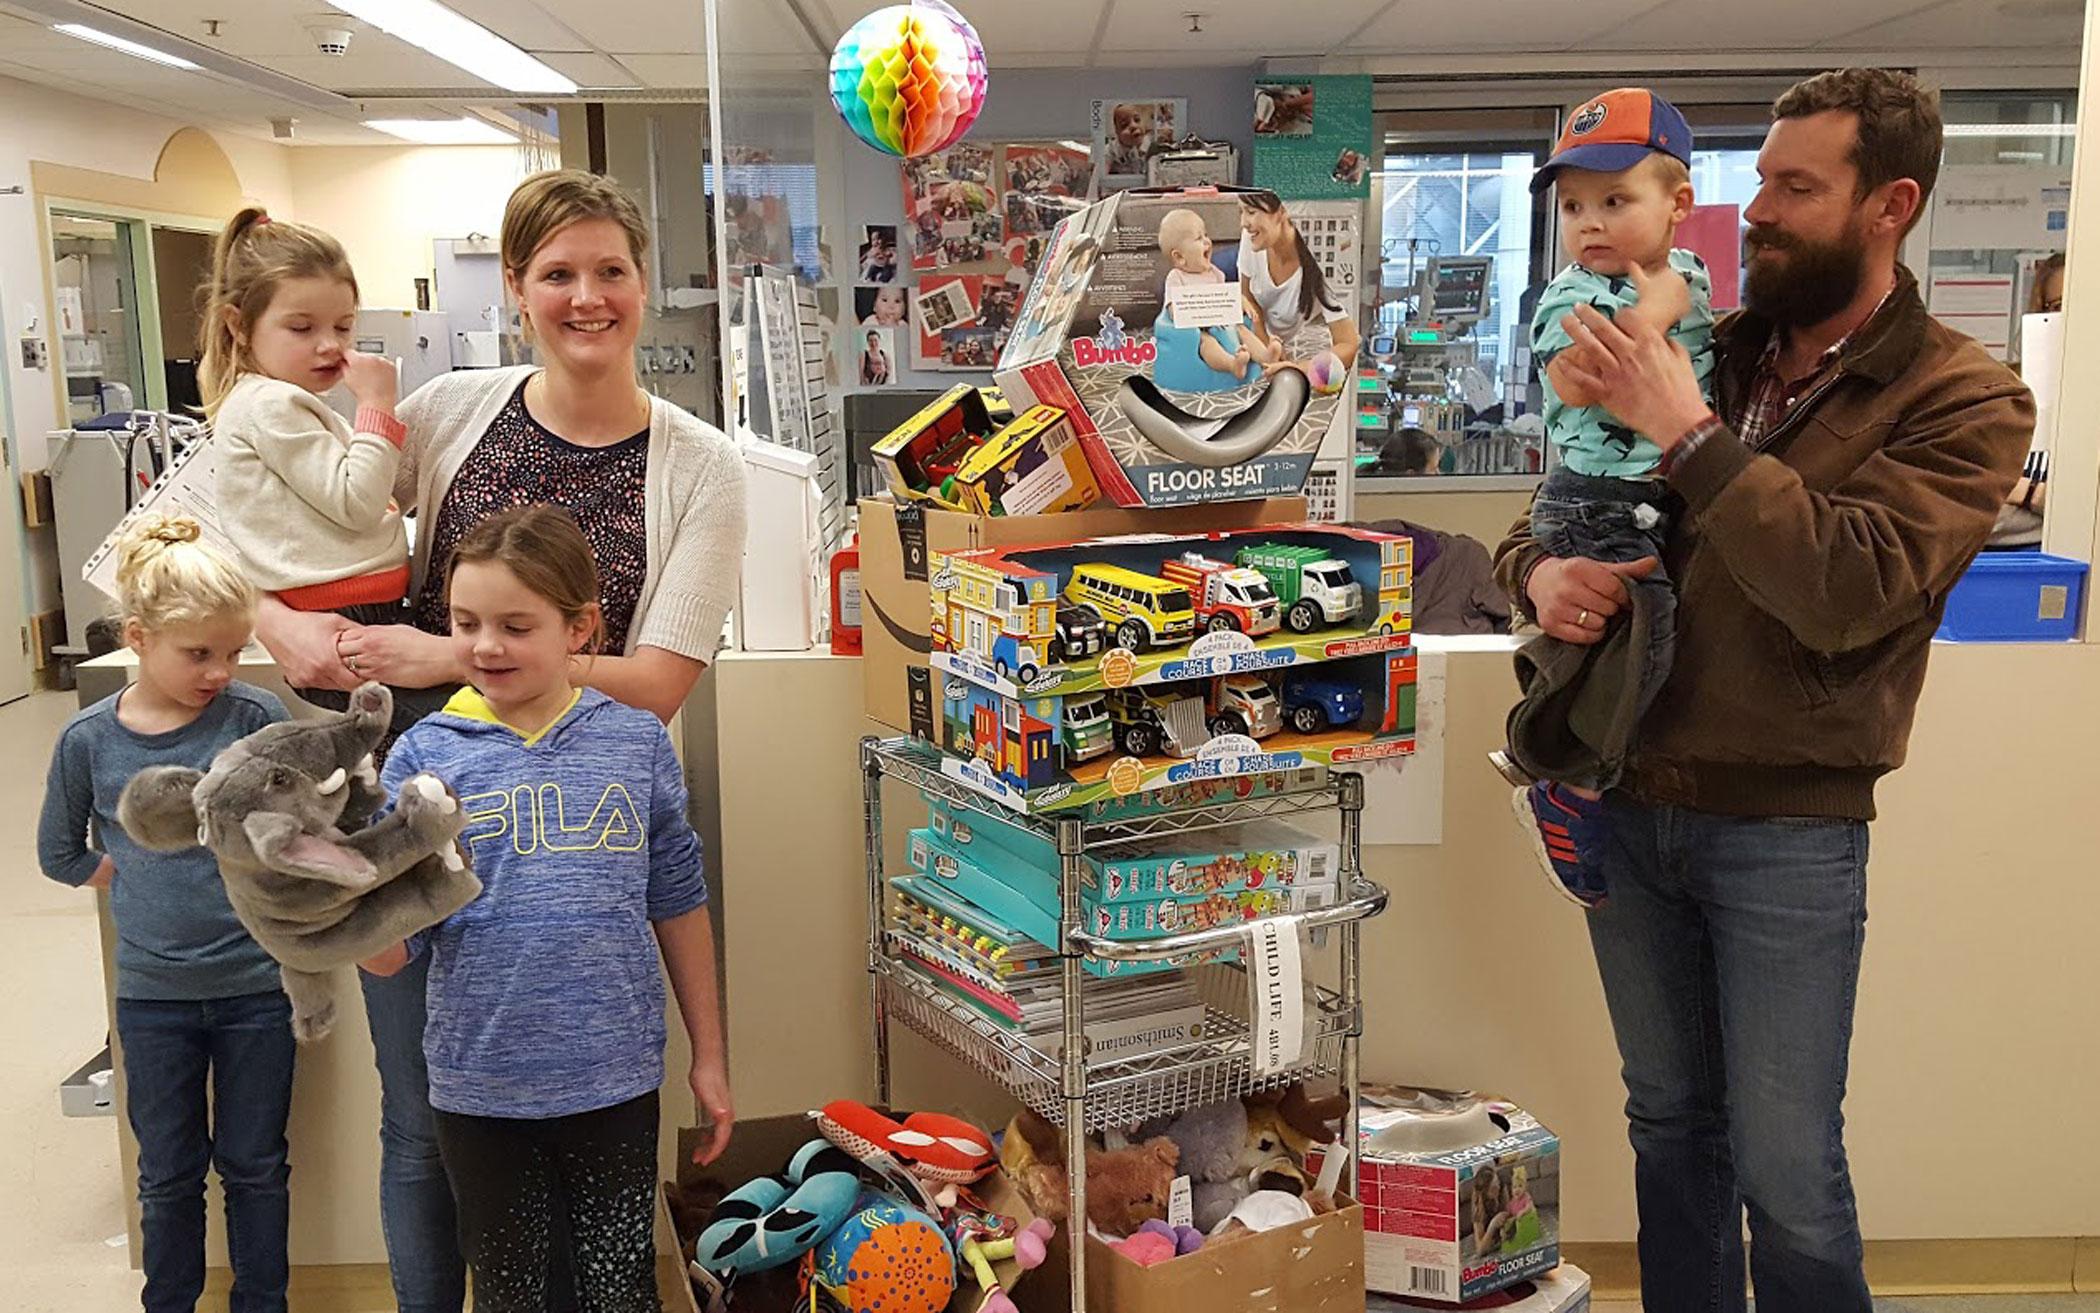 Aarnoutse family at Stollery Children’s Hospital with toys to deliver in honor of Willem.